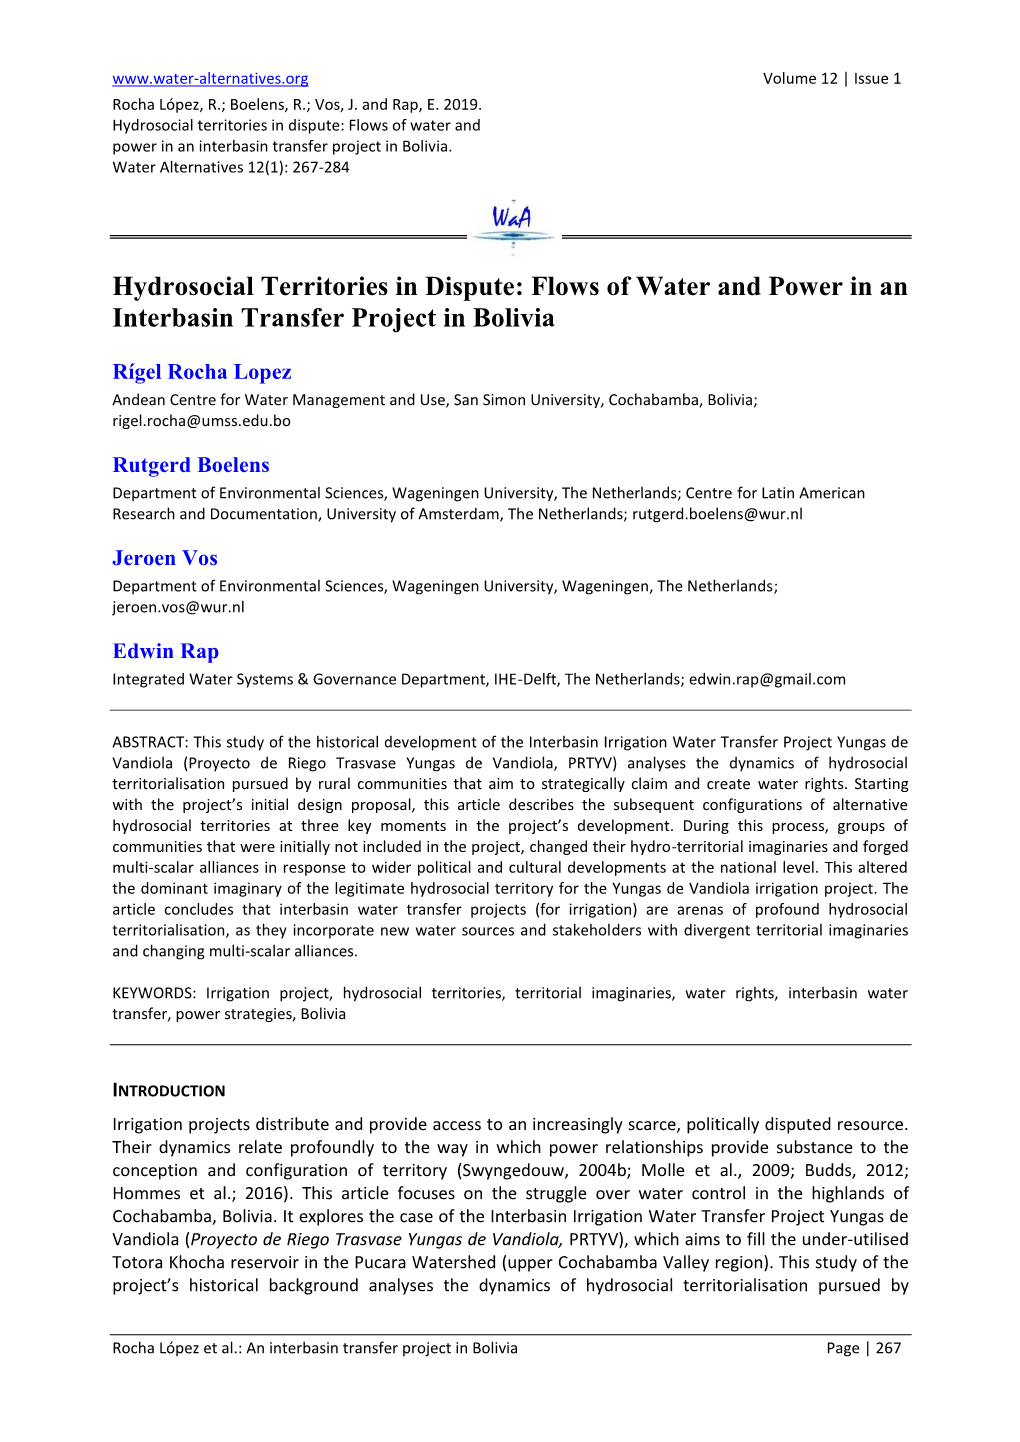 Hydrosocial Territories in Dispute: Flows of Water and Power in an Interbasin Transfer Project in Bolivia